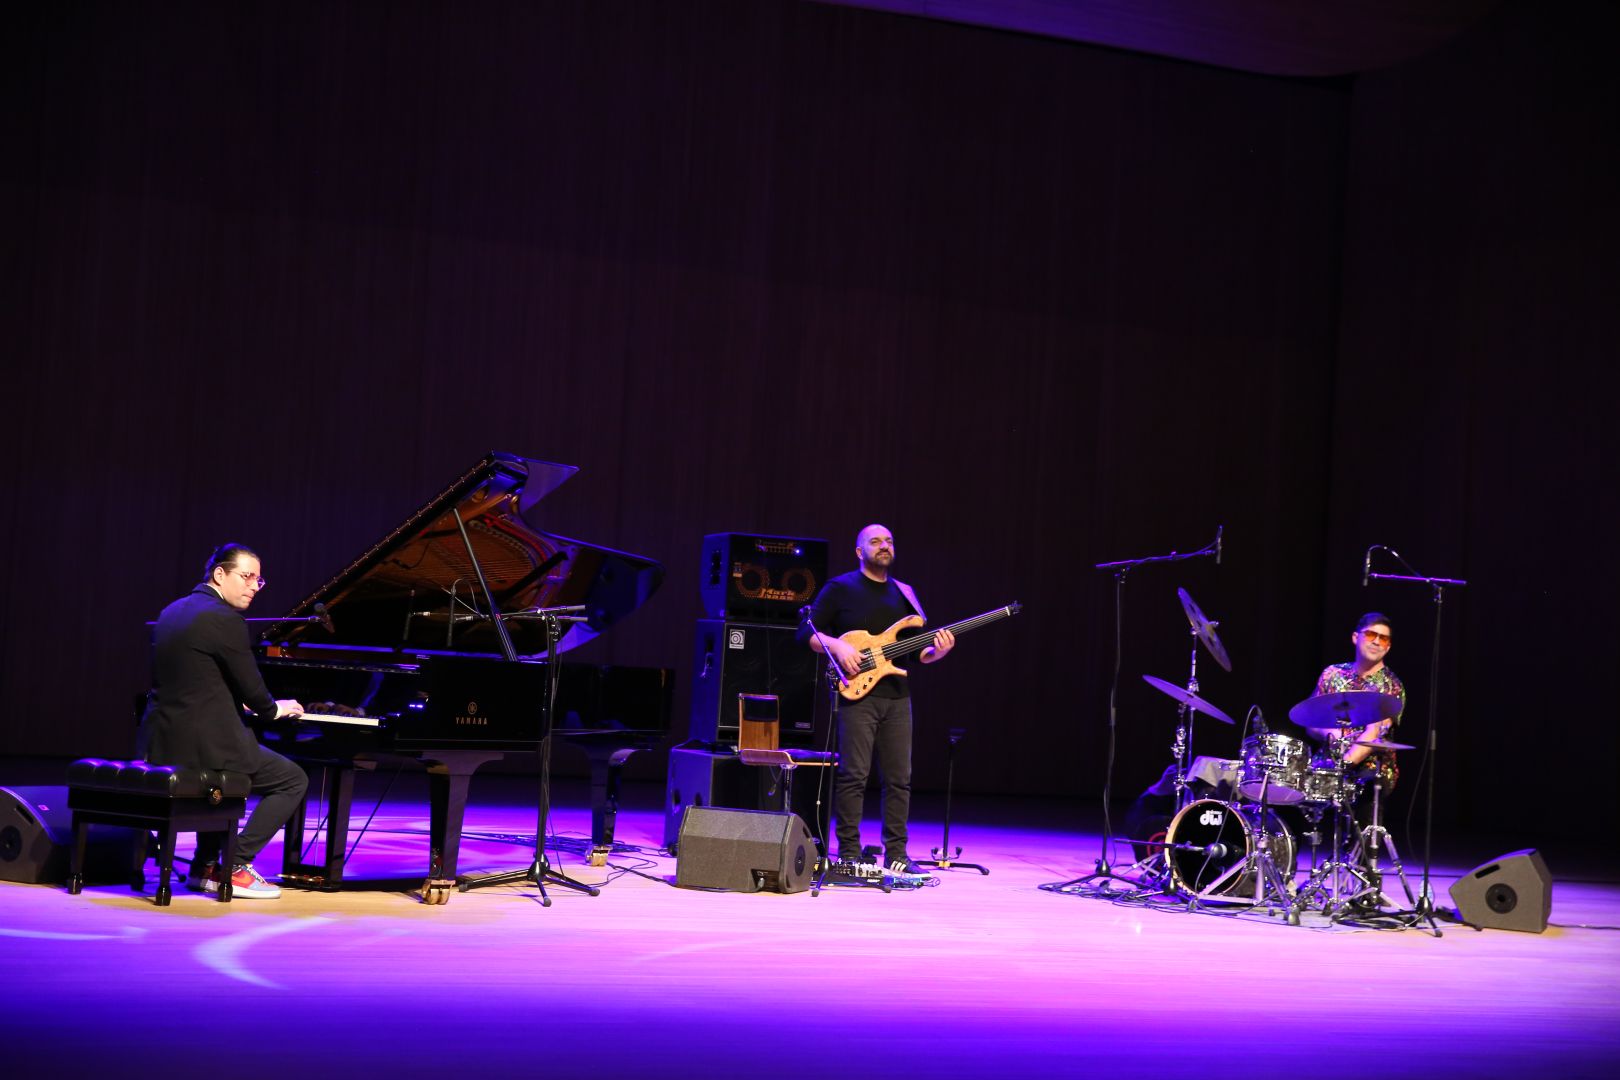 Renowned Cuban jazzman delights audience with dynamic improvisations [PHOTOS/VIDEO]